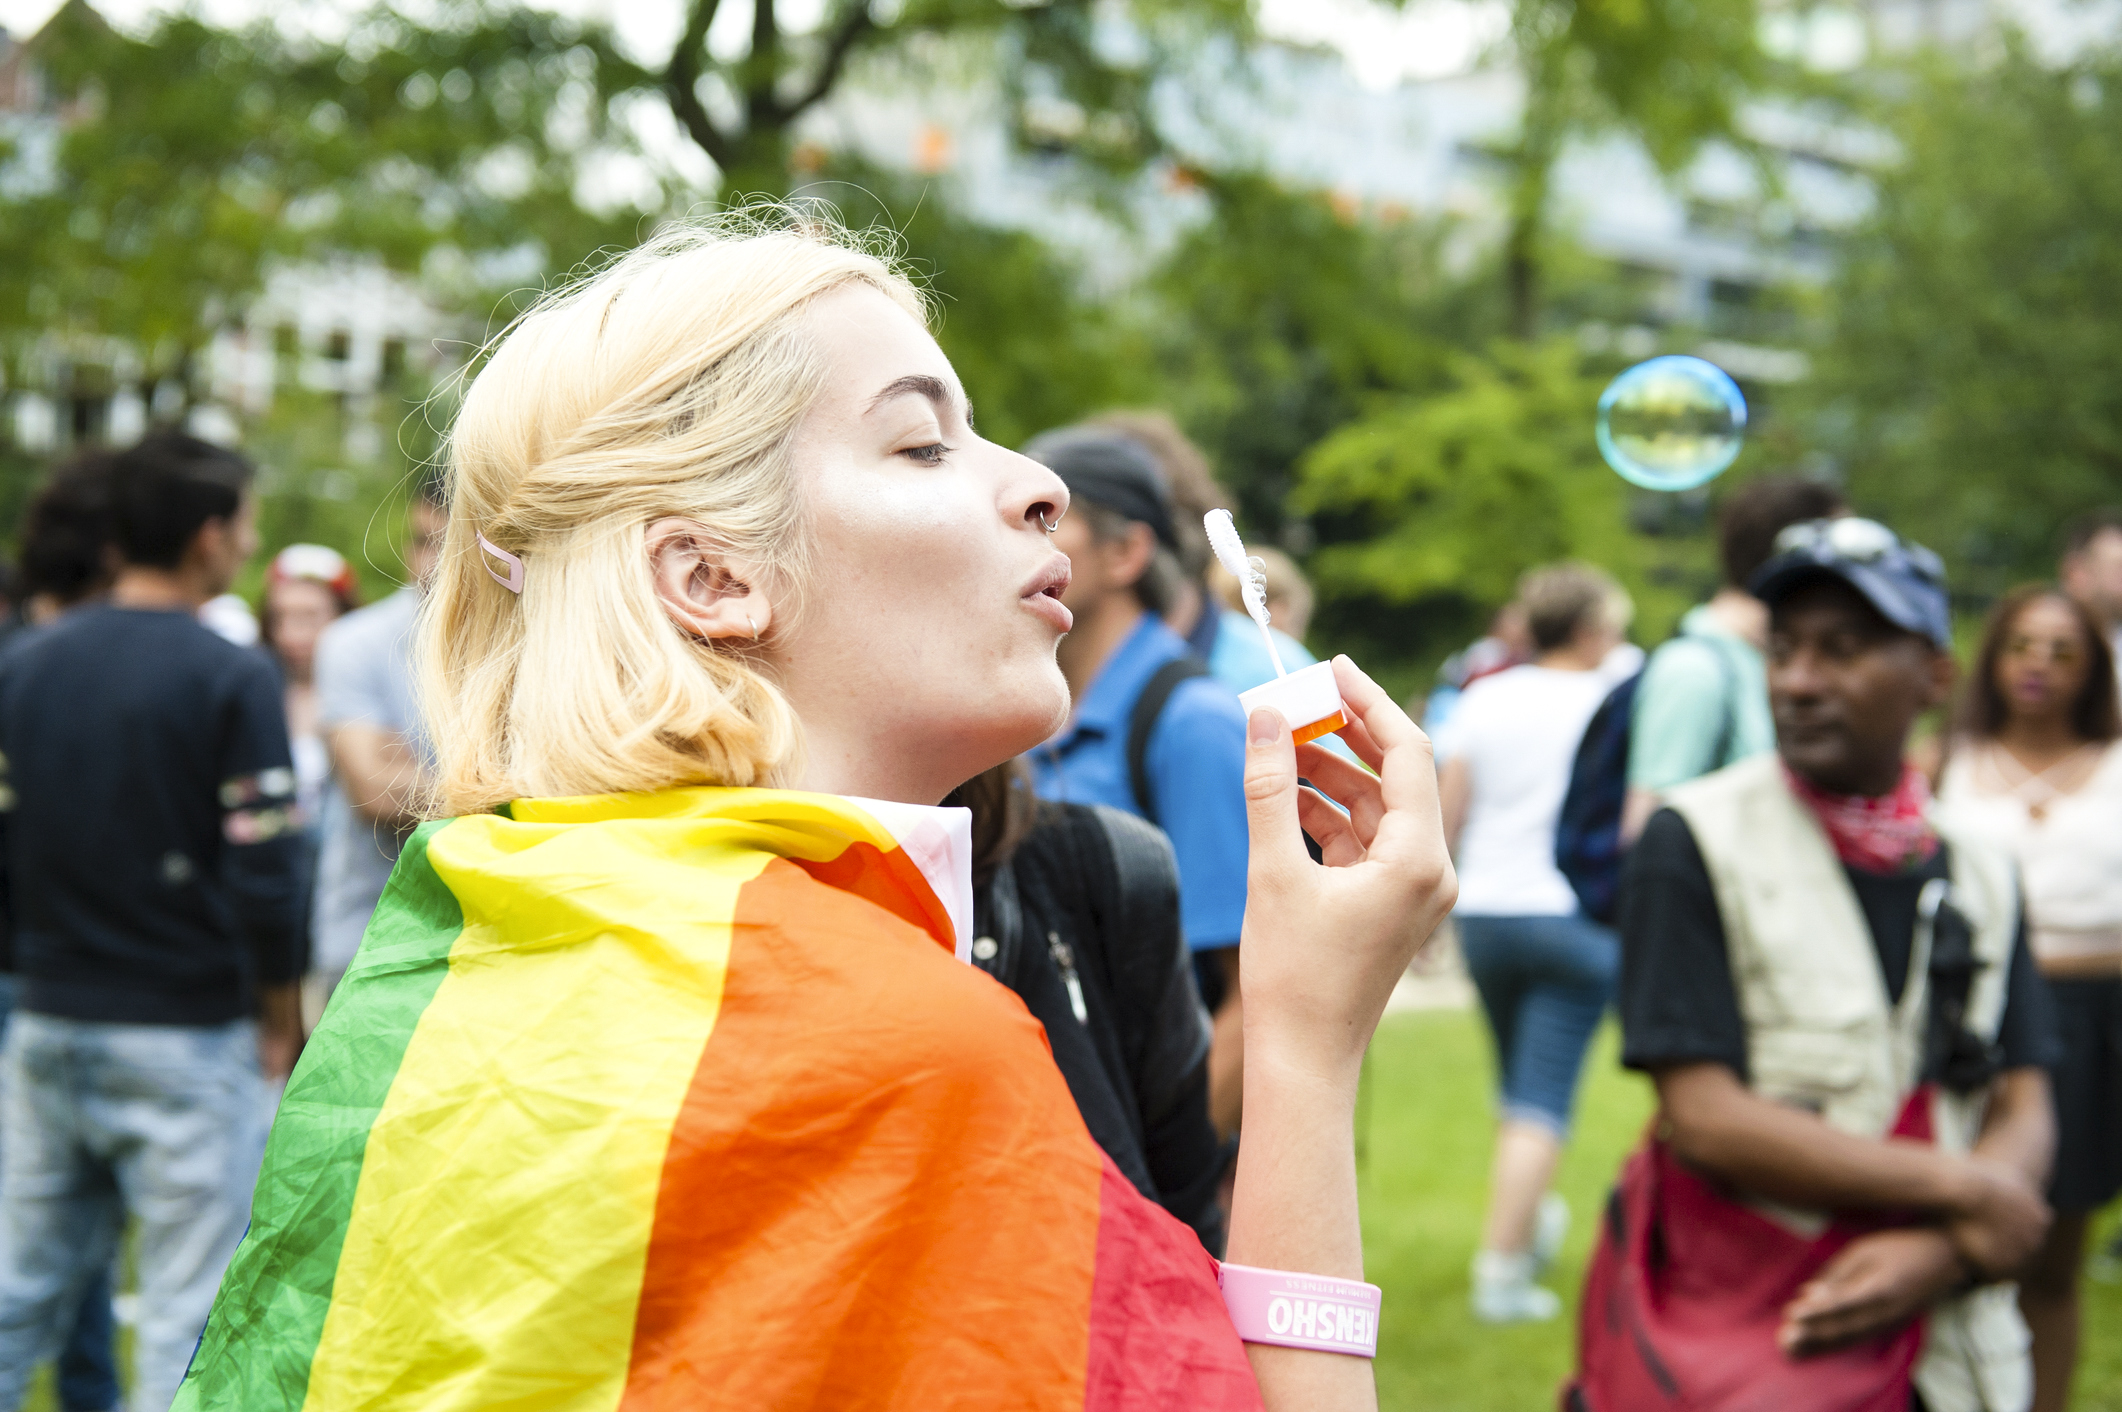 Study abroad in the Netherlands to learn about Dutch culture and their progressive approach to LGBTQ+ rights, women and gender studies, and sex education. Pride Walk in Amsterdam EuroPride